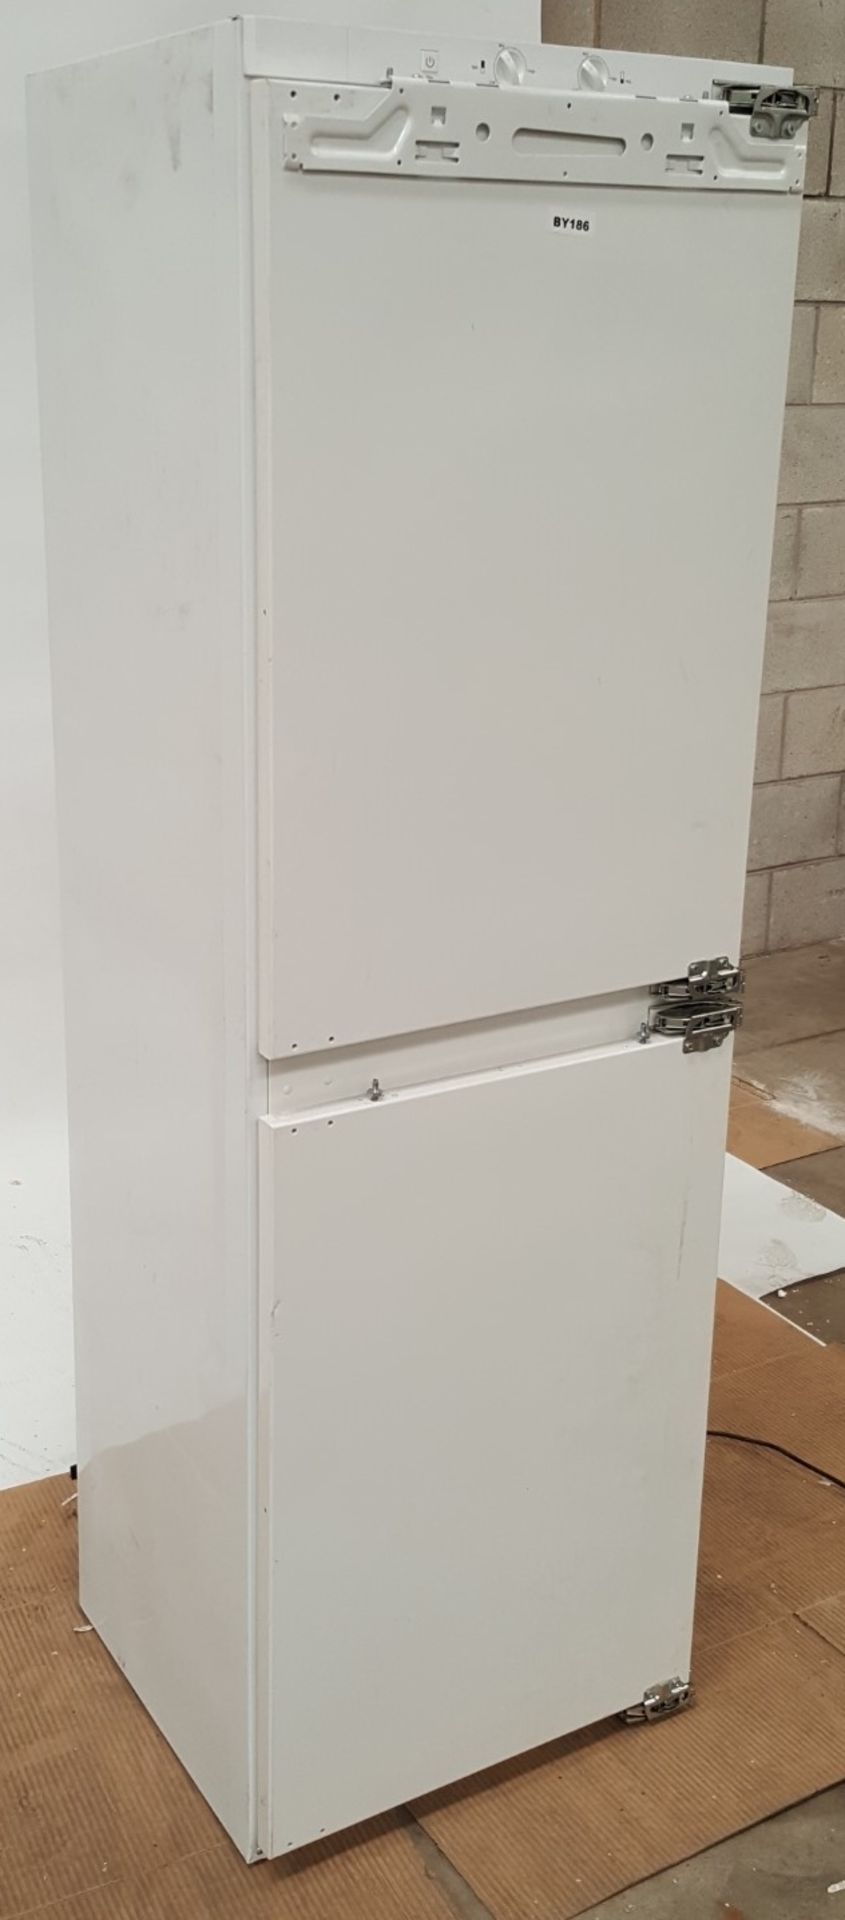 1 x Prima Integrated 50/50 Frost Free Fridge Freezer LPR475A1 - Ref BY186 - Image 5 of 7